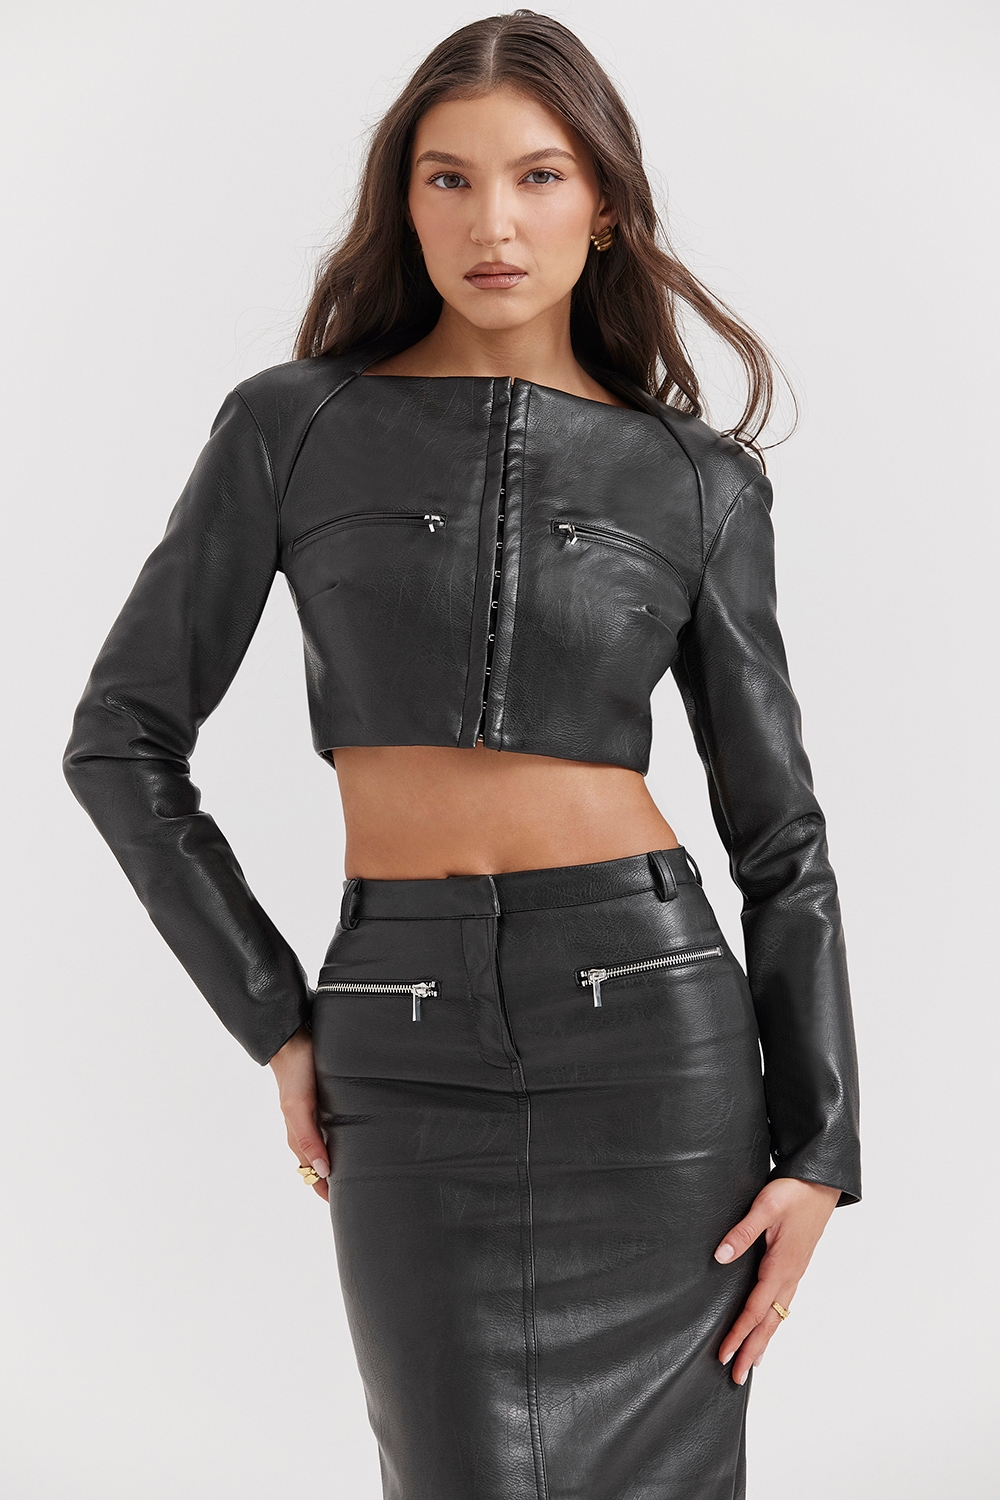 Ione, Black Vegan Leather Cropped Top - SALE